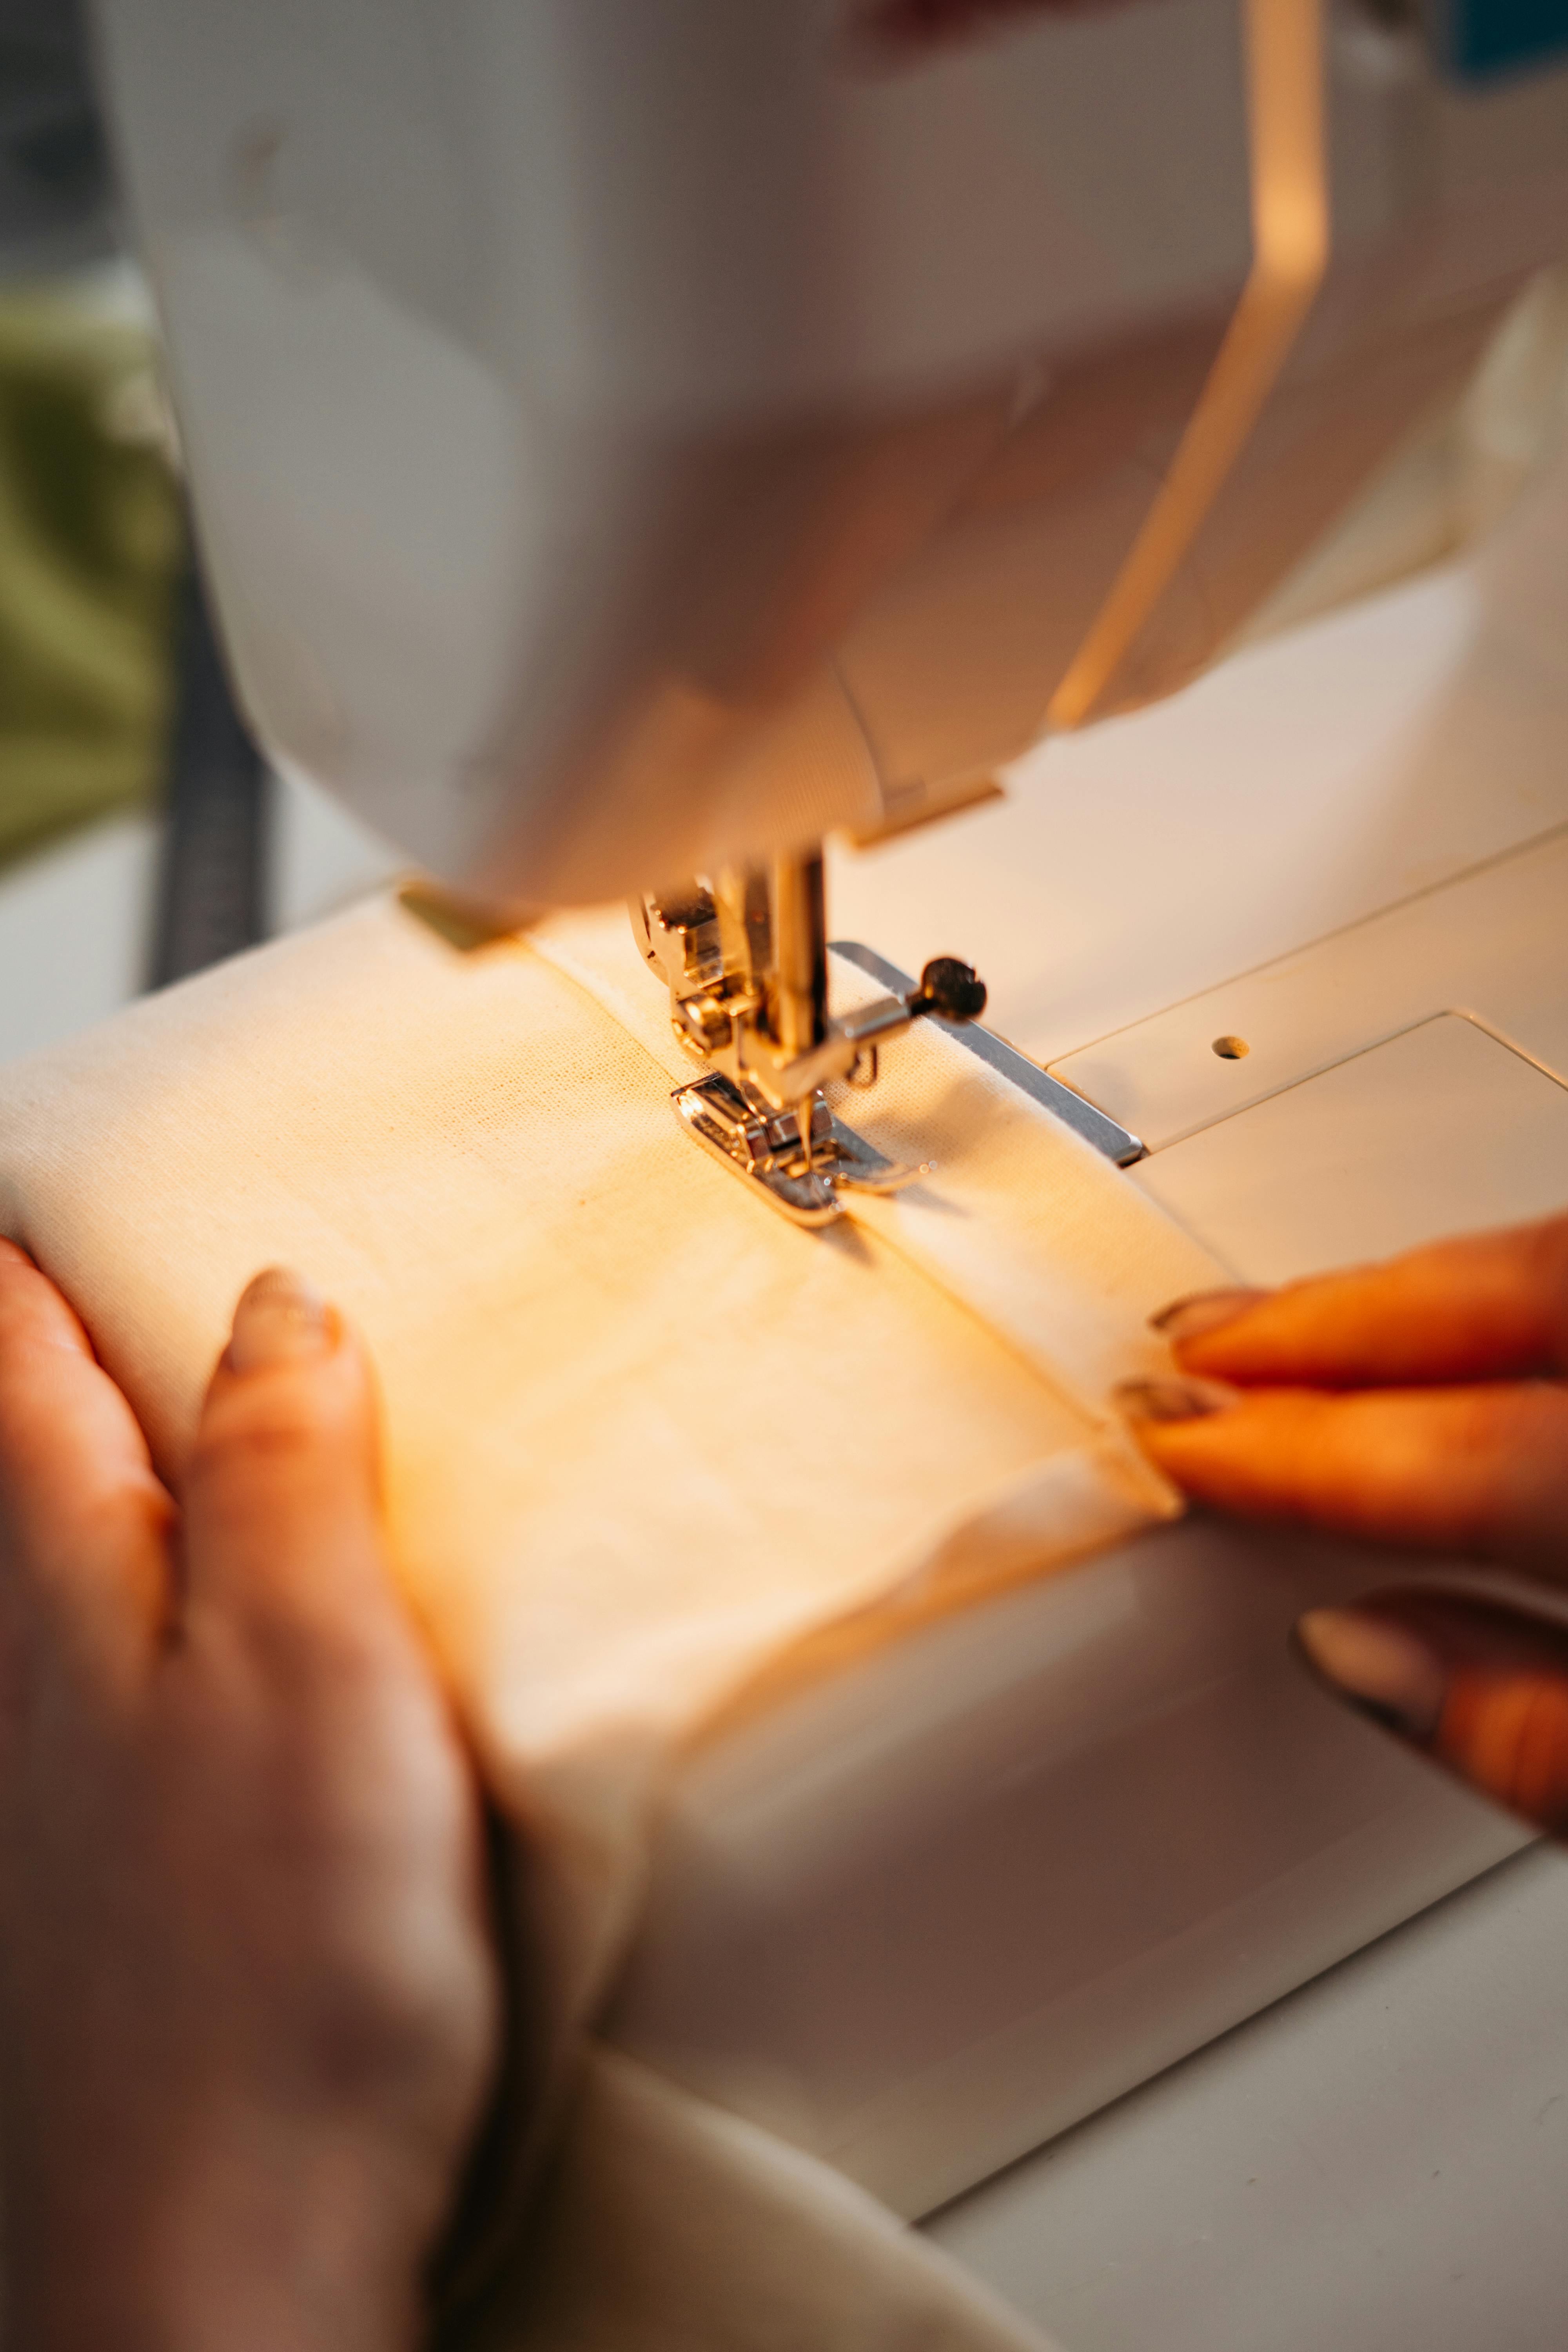 Tailor Photos, Download The BEST Free Tailor Stock Photos & HD Images